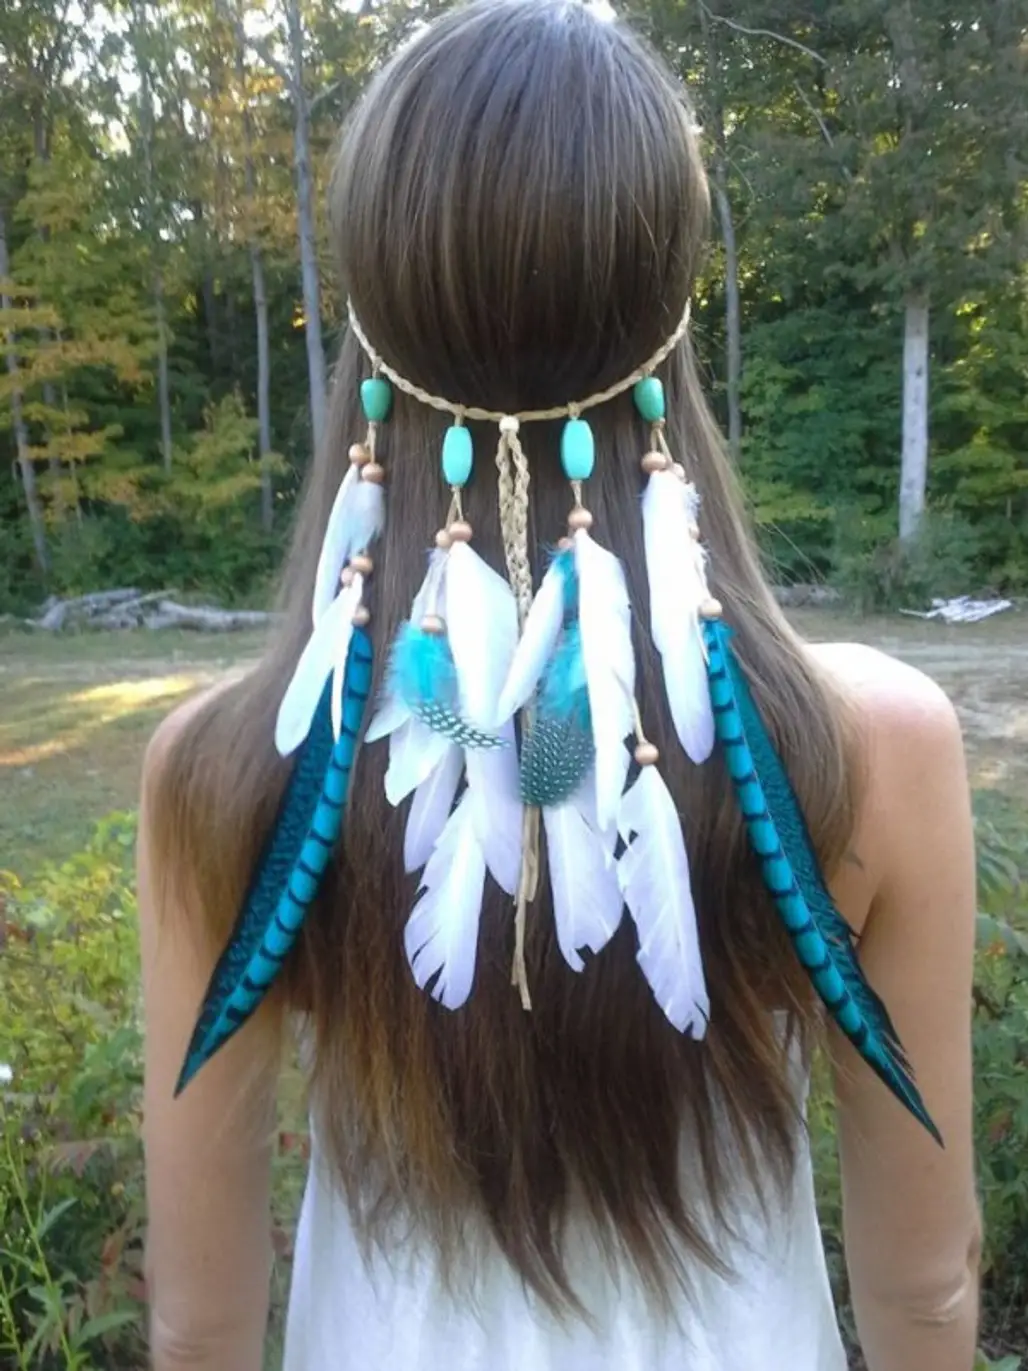 A Turquoise Princess Feather Headband is Fun for the Weekend